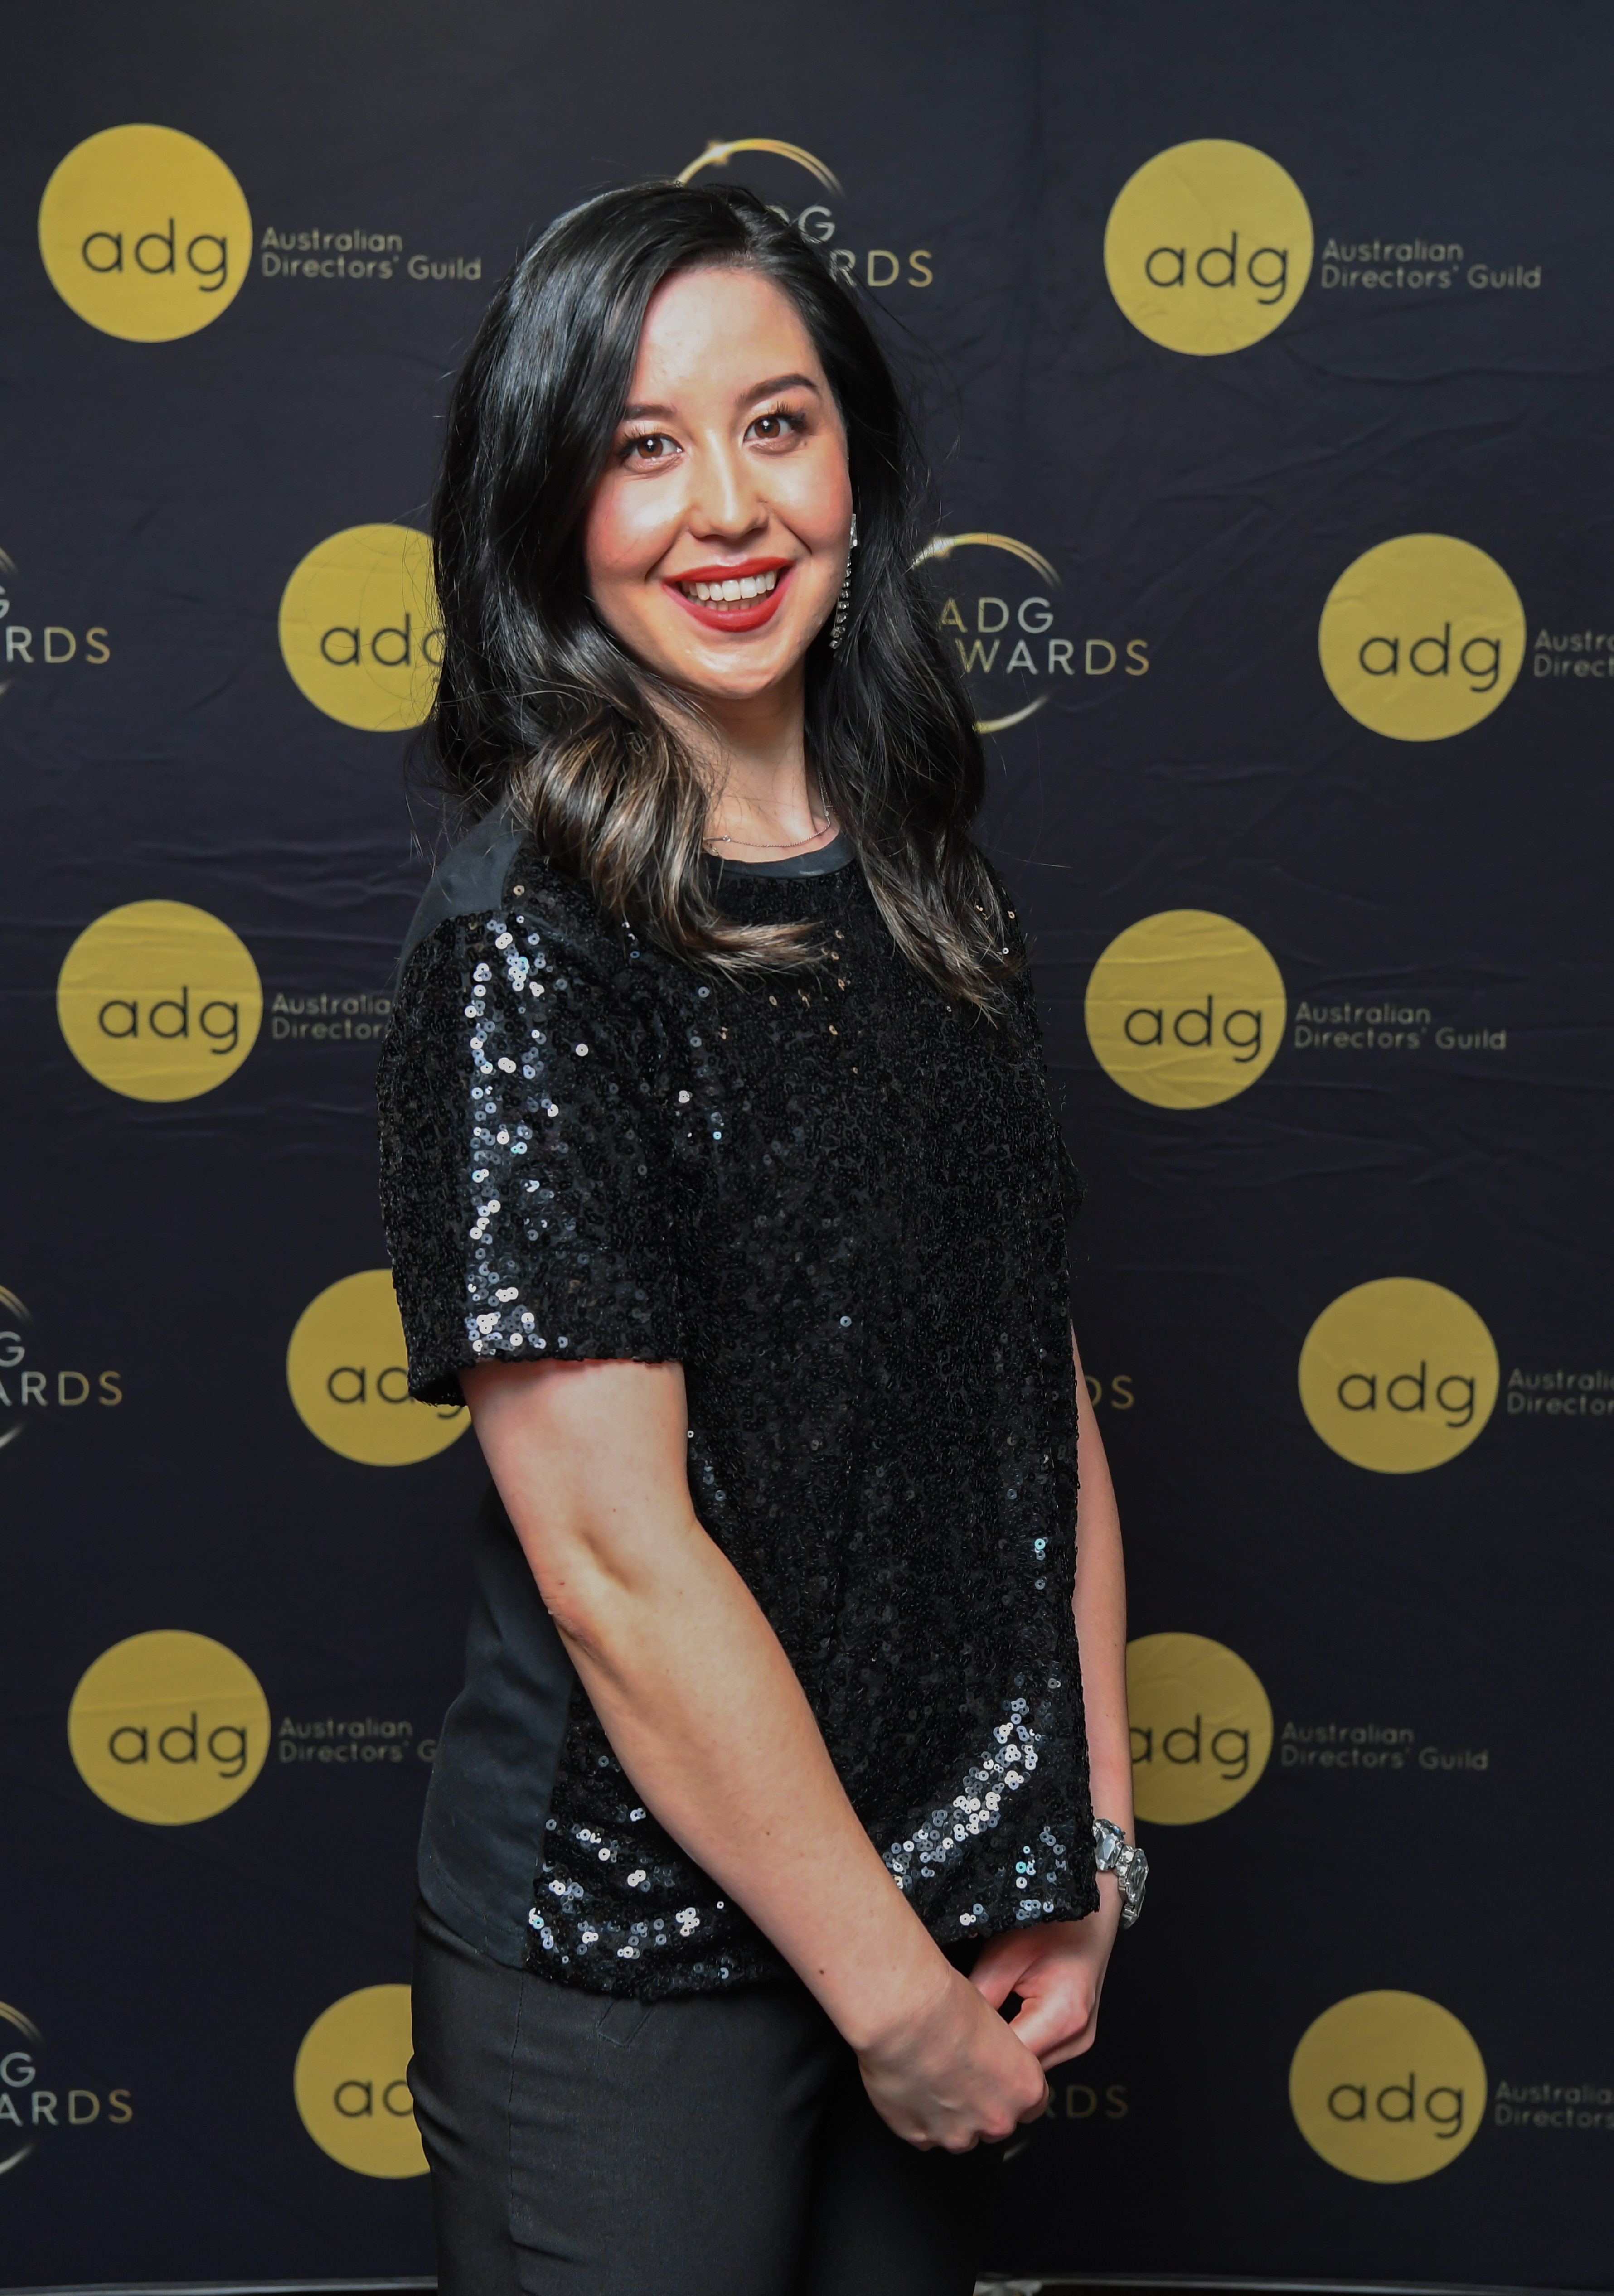 Nina Oyama at the 2020 Australian Directors' Guild Awards on October 19, 2020, in Sydney, Australia. | Source: Getty Images